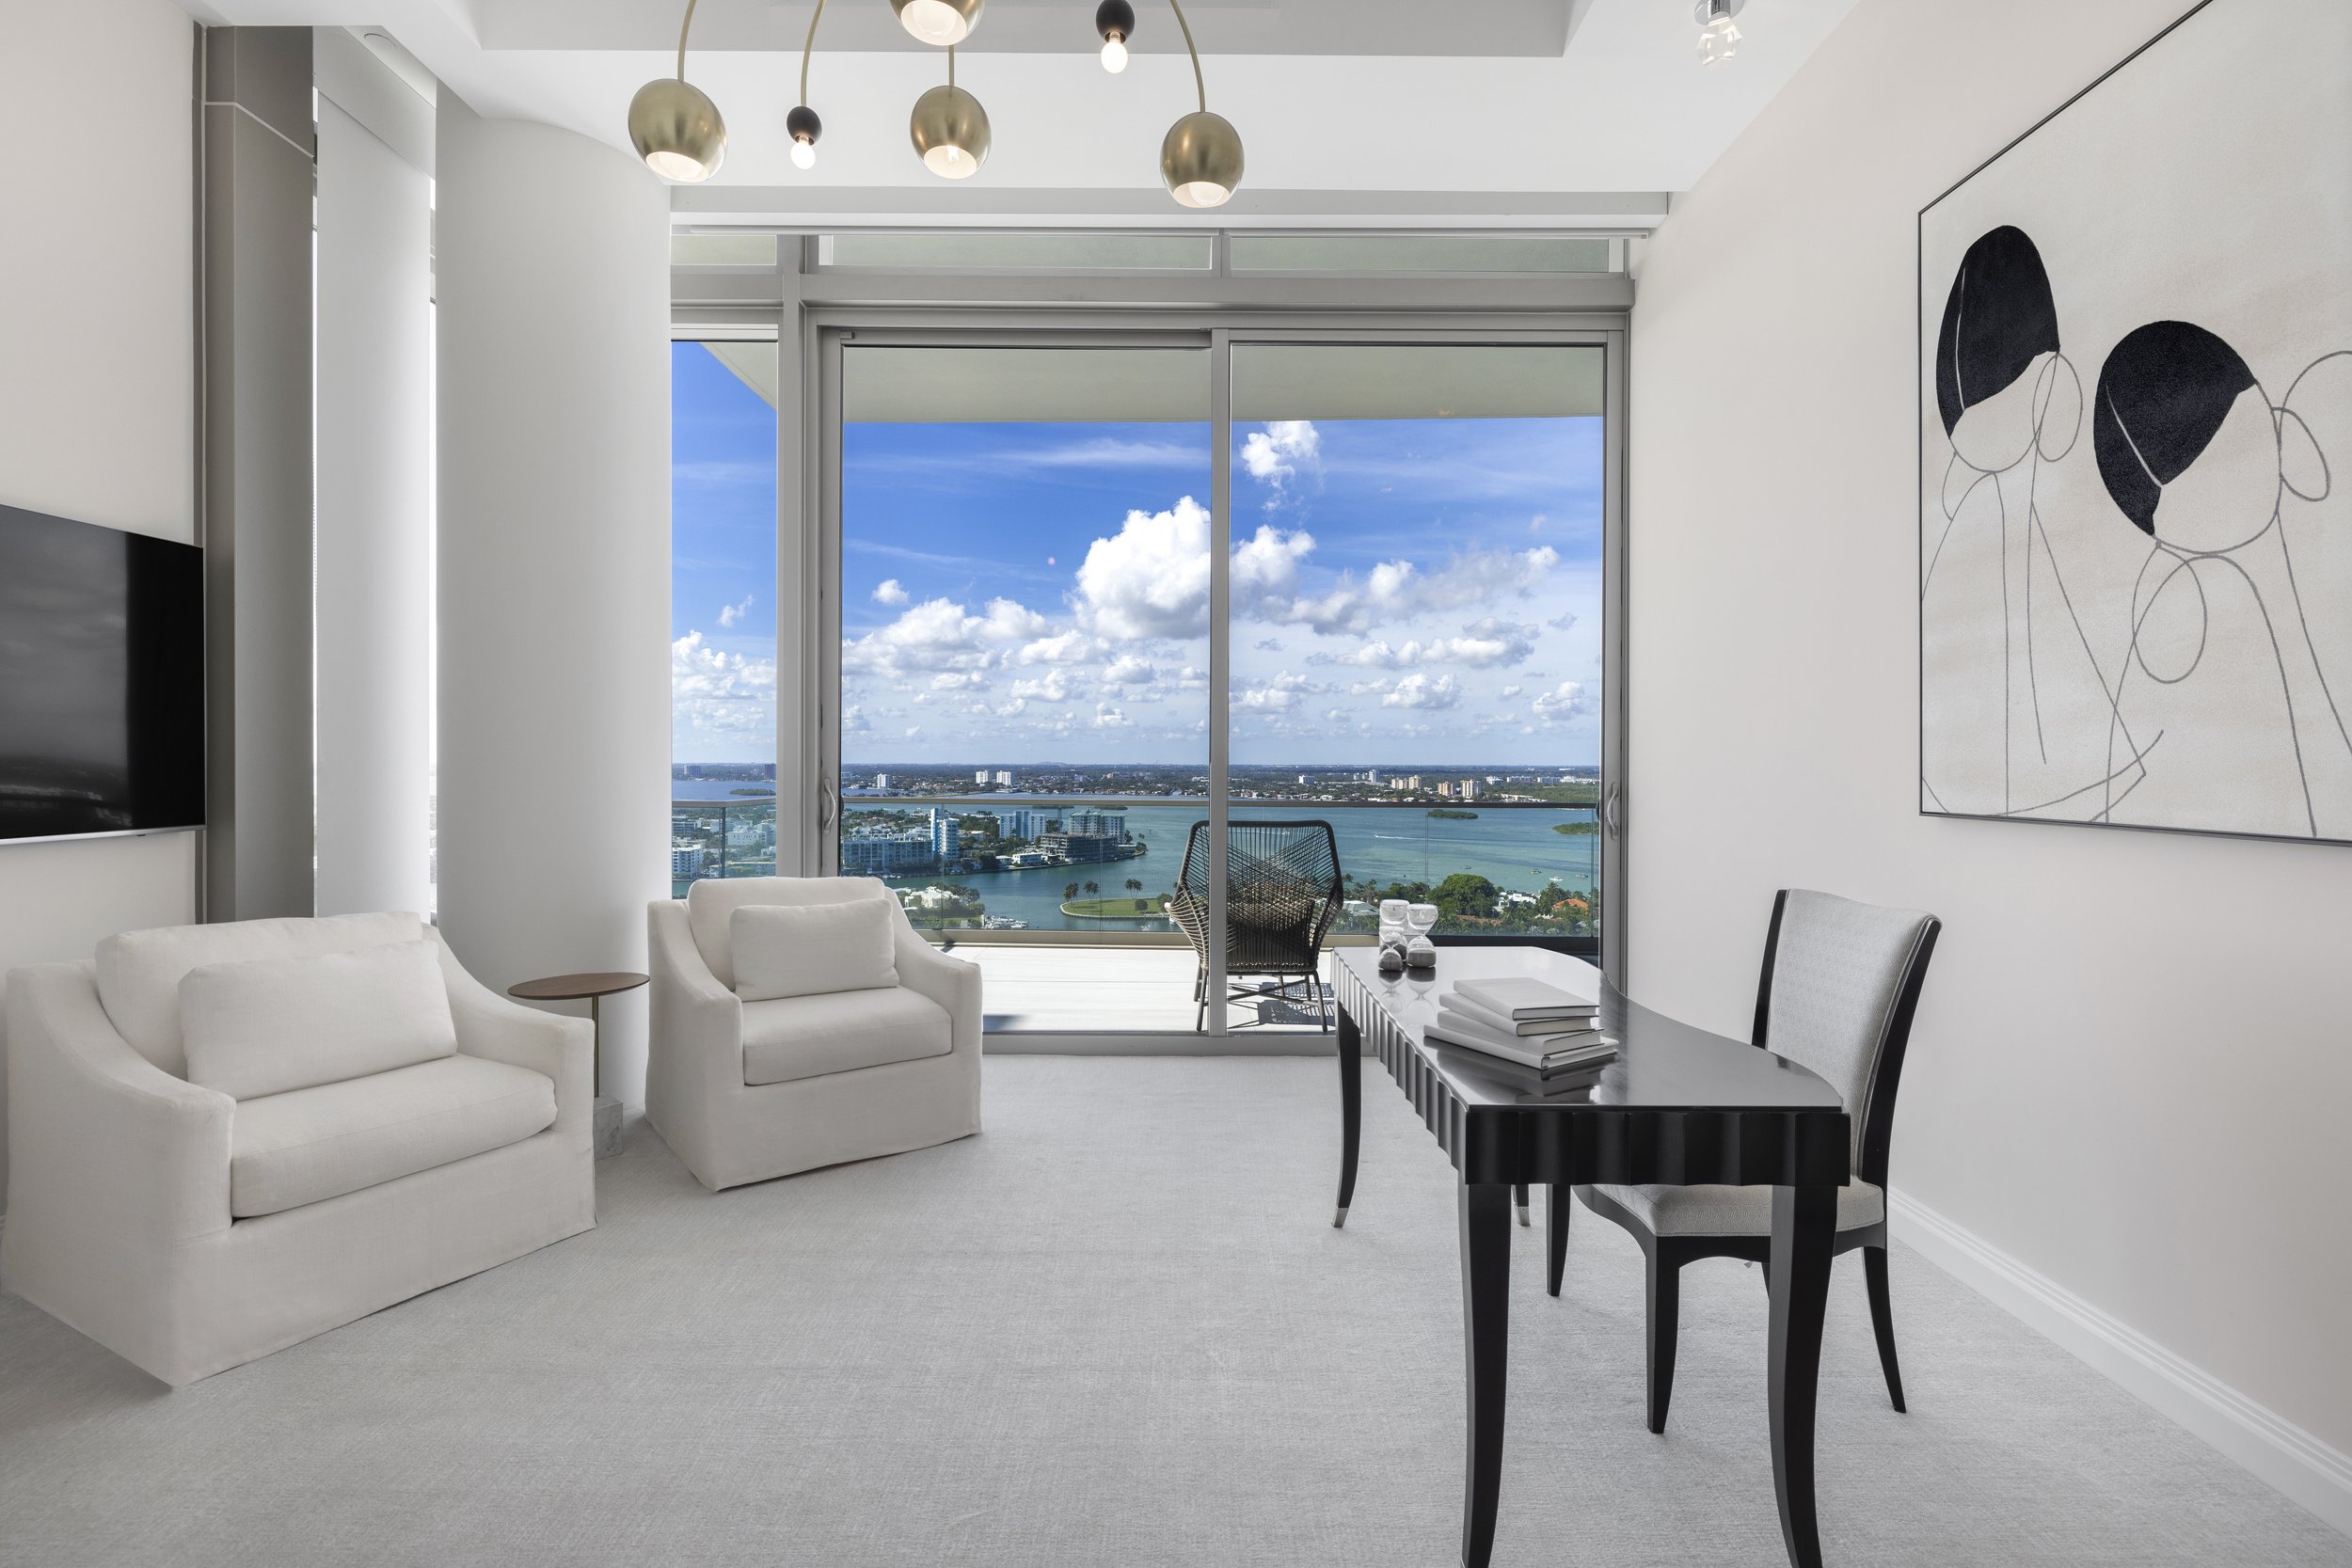 Step Inside This Two-Story Crown Jewel Penthouse At Oceana Bal Harbour Asking $25 Million 212.jpg